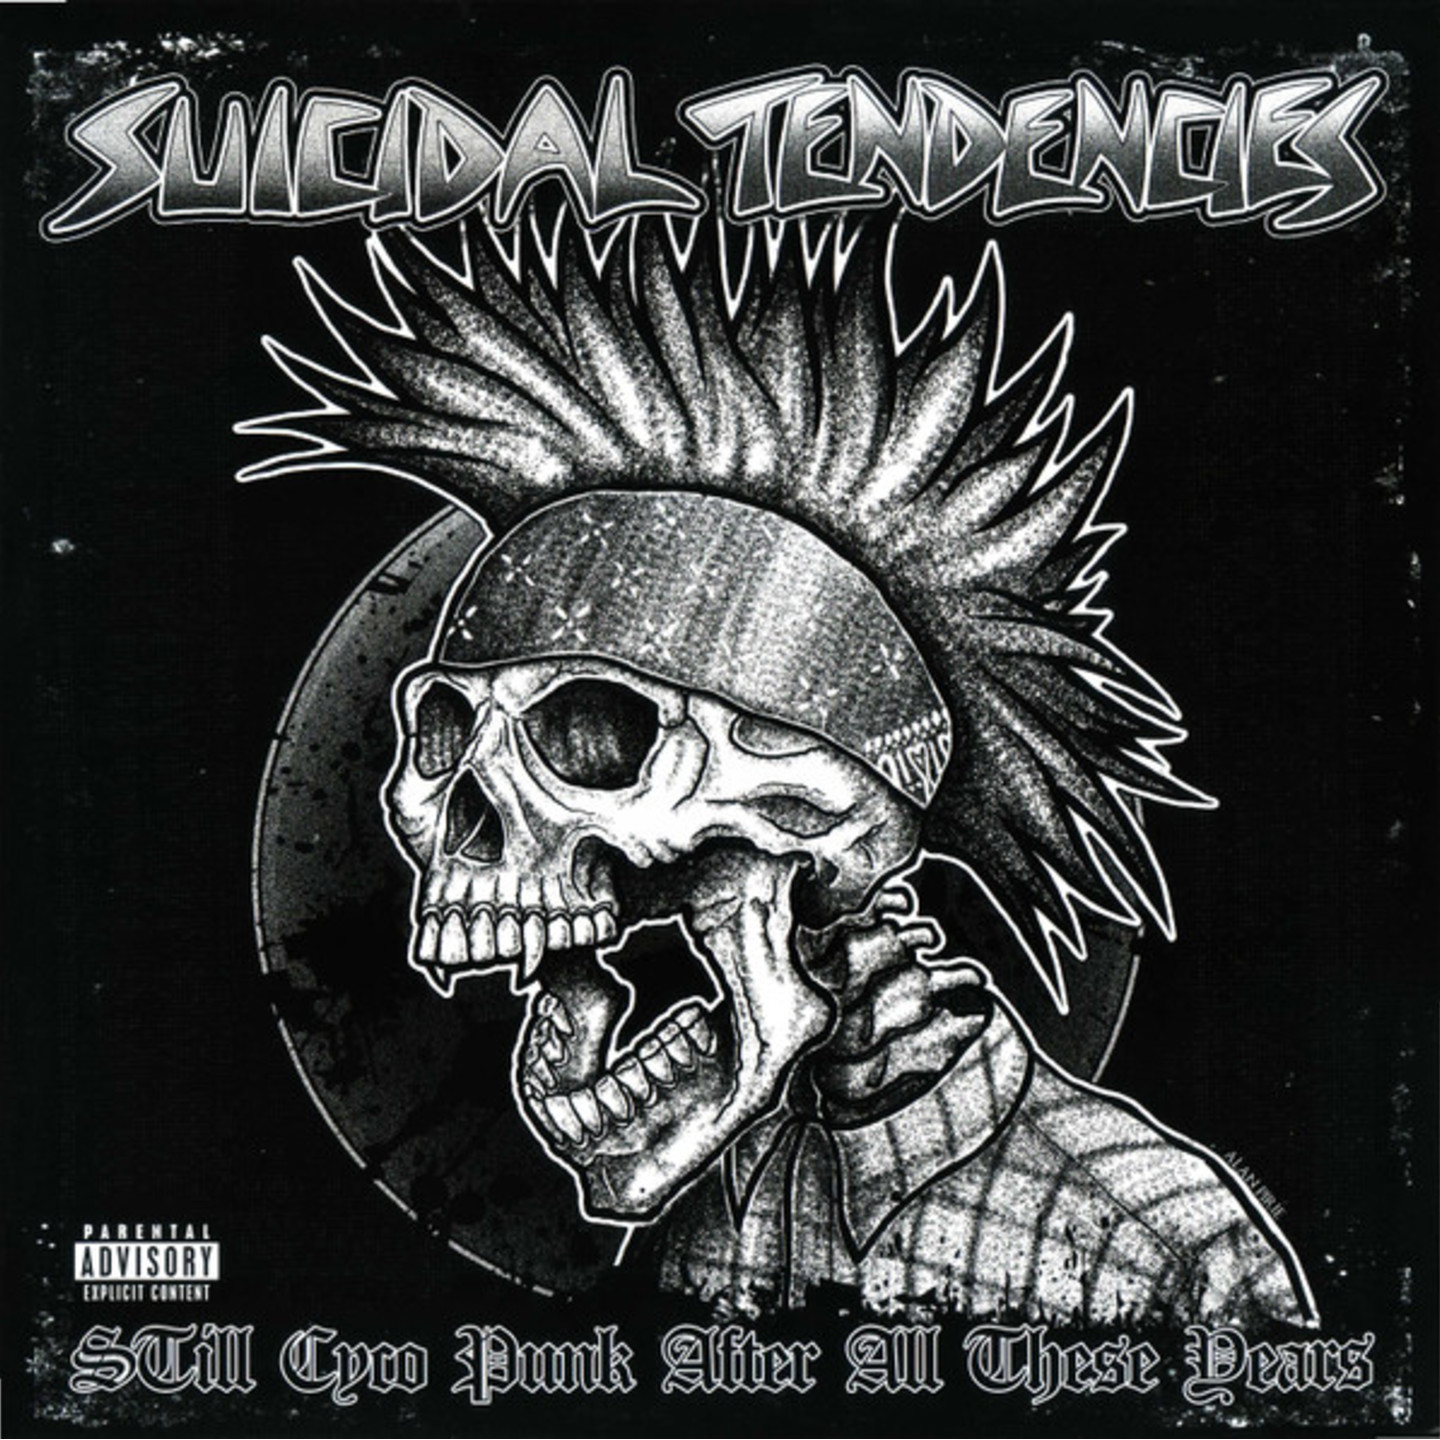 SUICIDAL TENDENCIES - Still Cyco Punk After All These Years LP Purple Vinyl